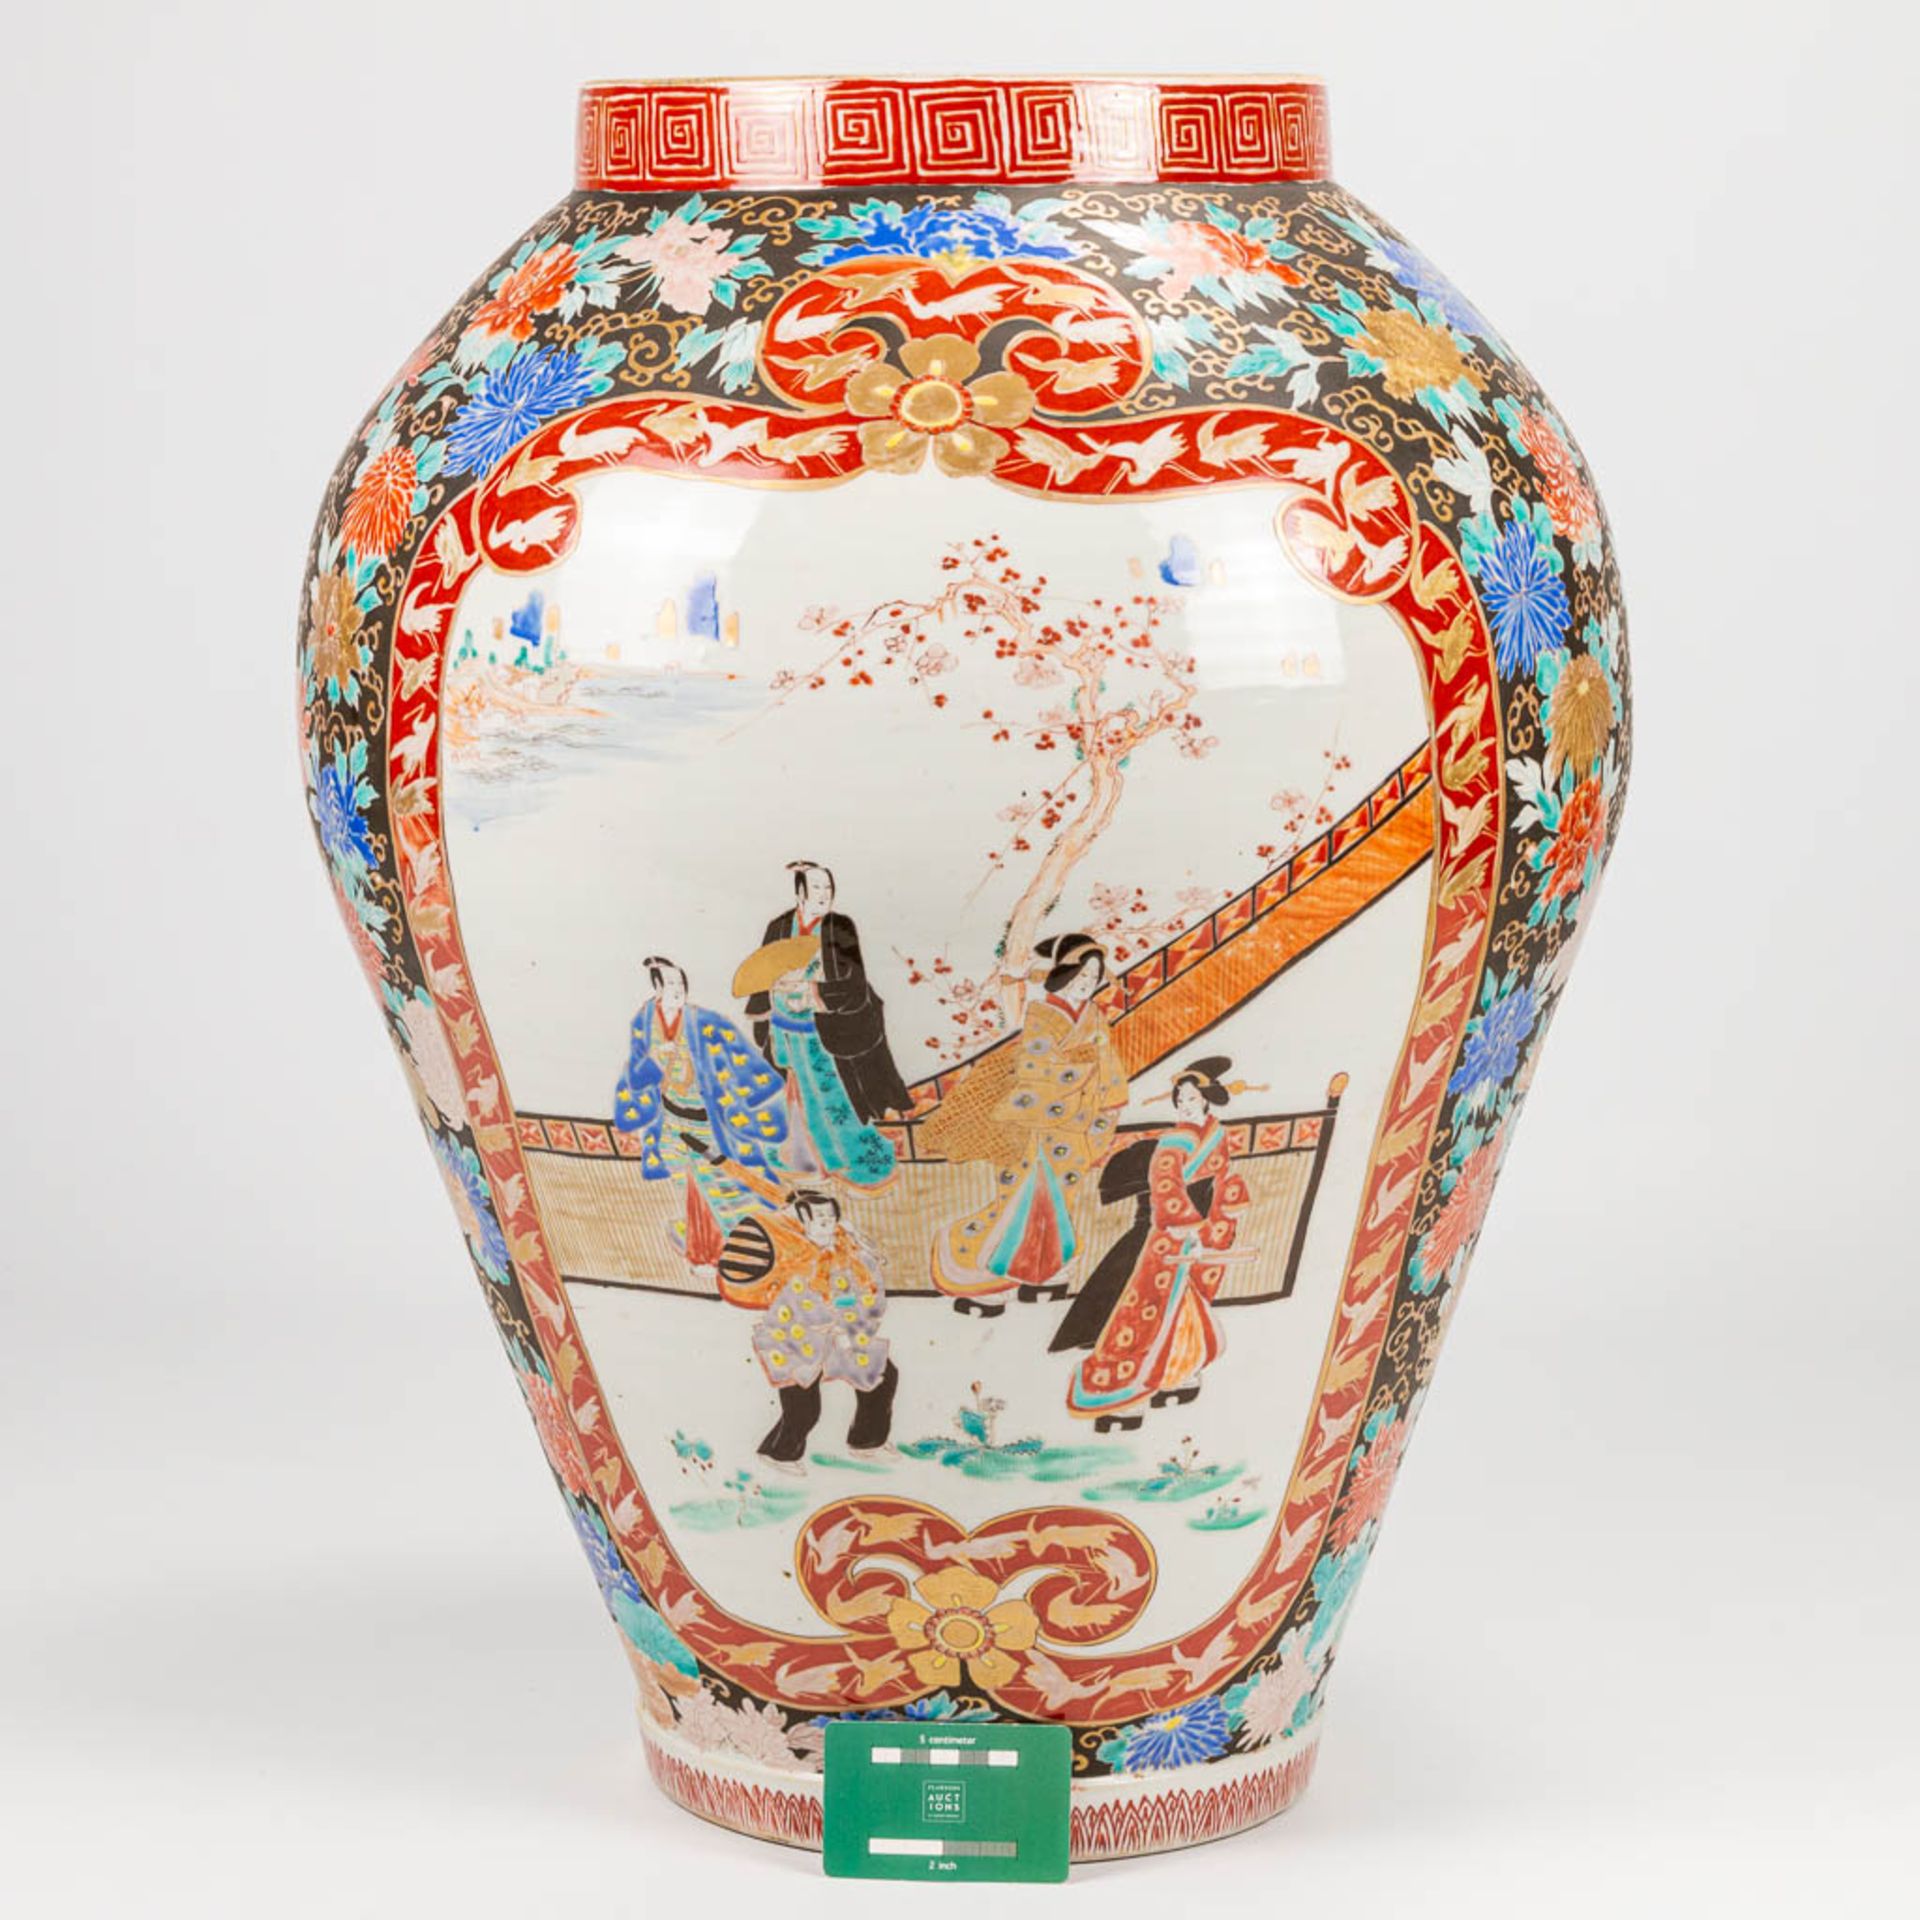 A large Imari display vase made of hand-painted porcelain in Japan. 19th/20th century. (60 x 42 cm) - Image 8 of 21